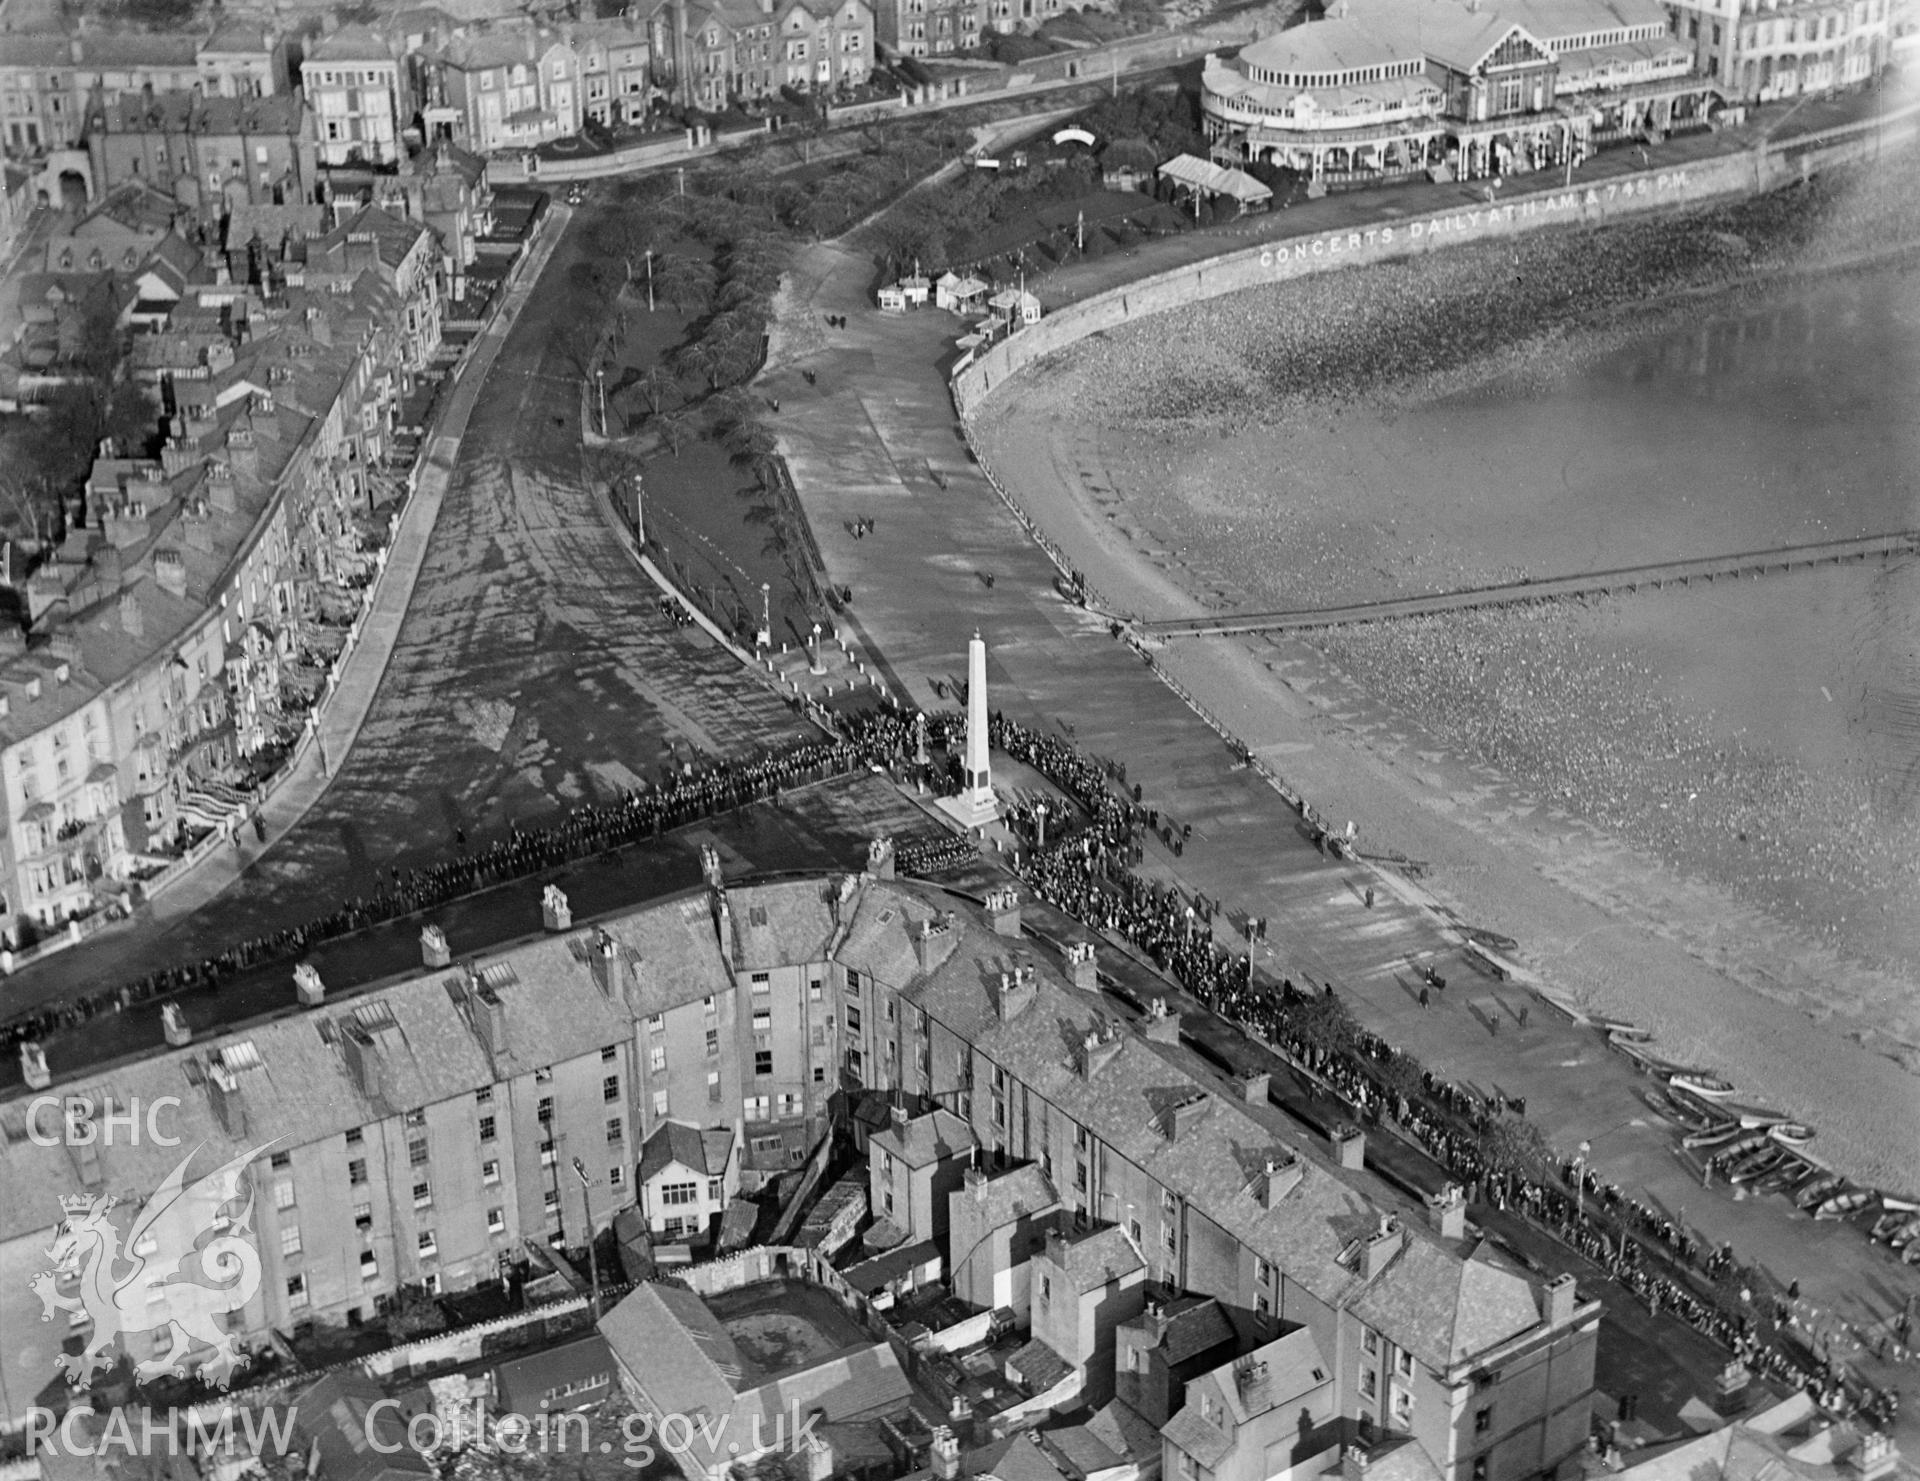 Llandudno, showing the Cenotaph war memorial during ceremony, oblique aerial view. 5?x4? black and white glass plate negative.